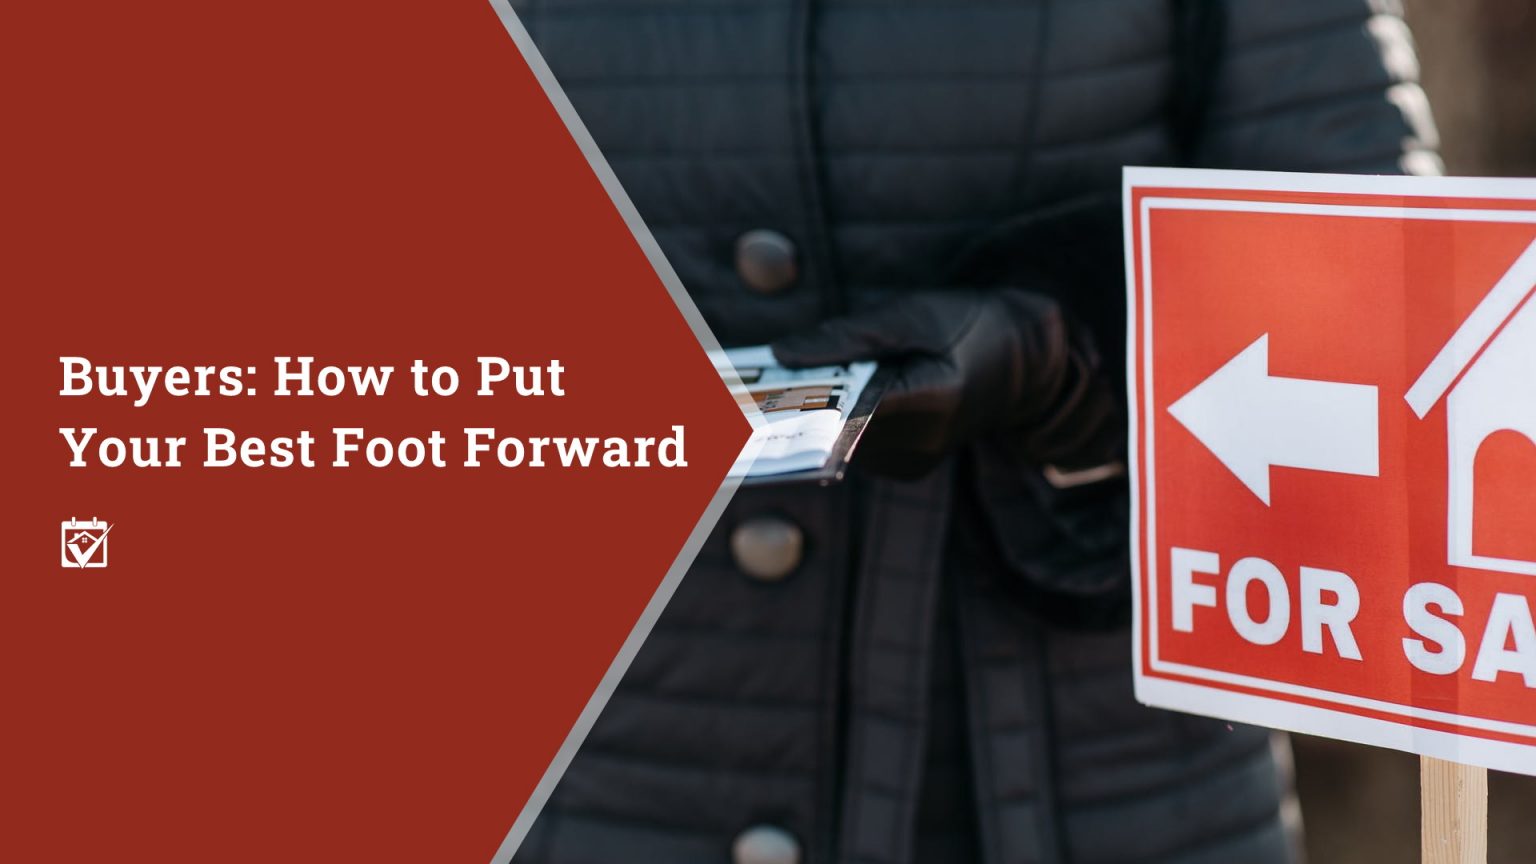 Buyers: How to Put Your Best Foot Forward